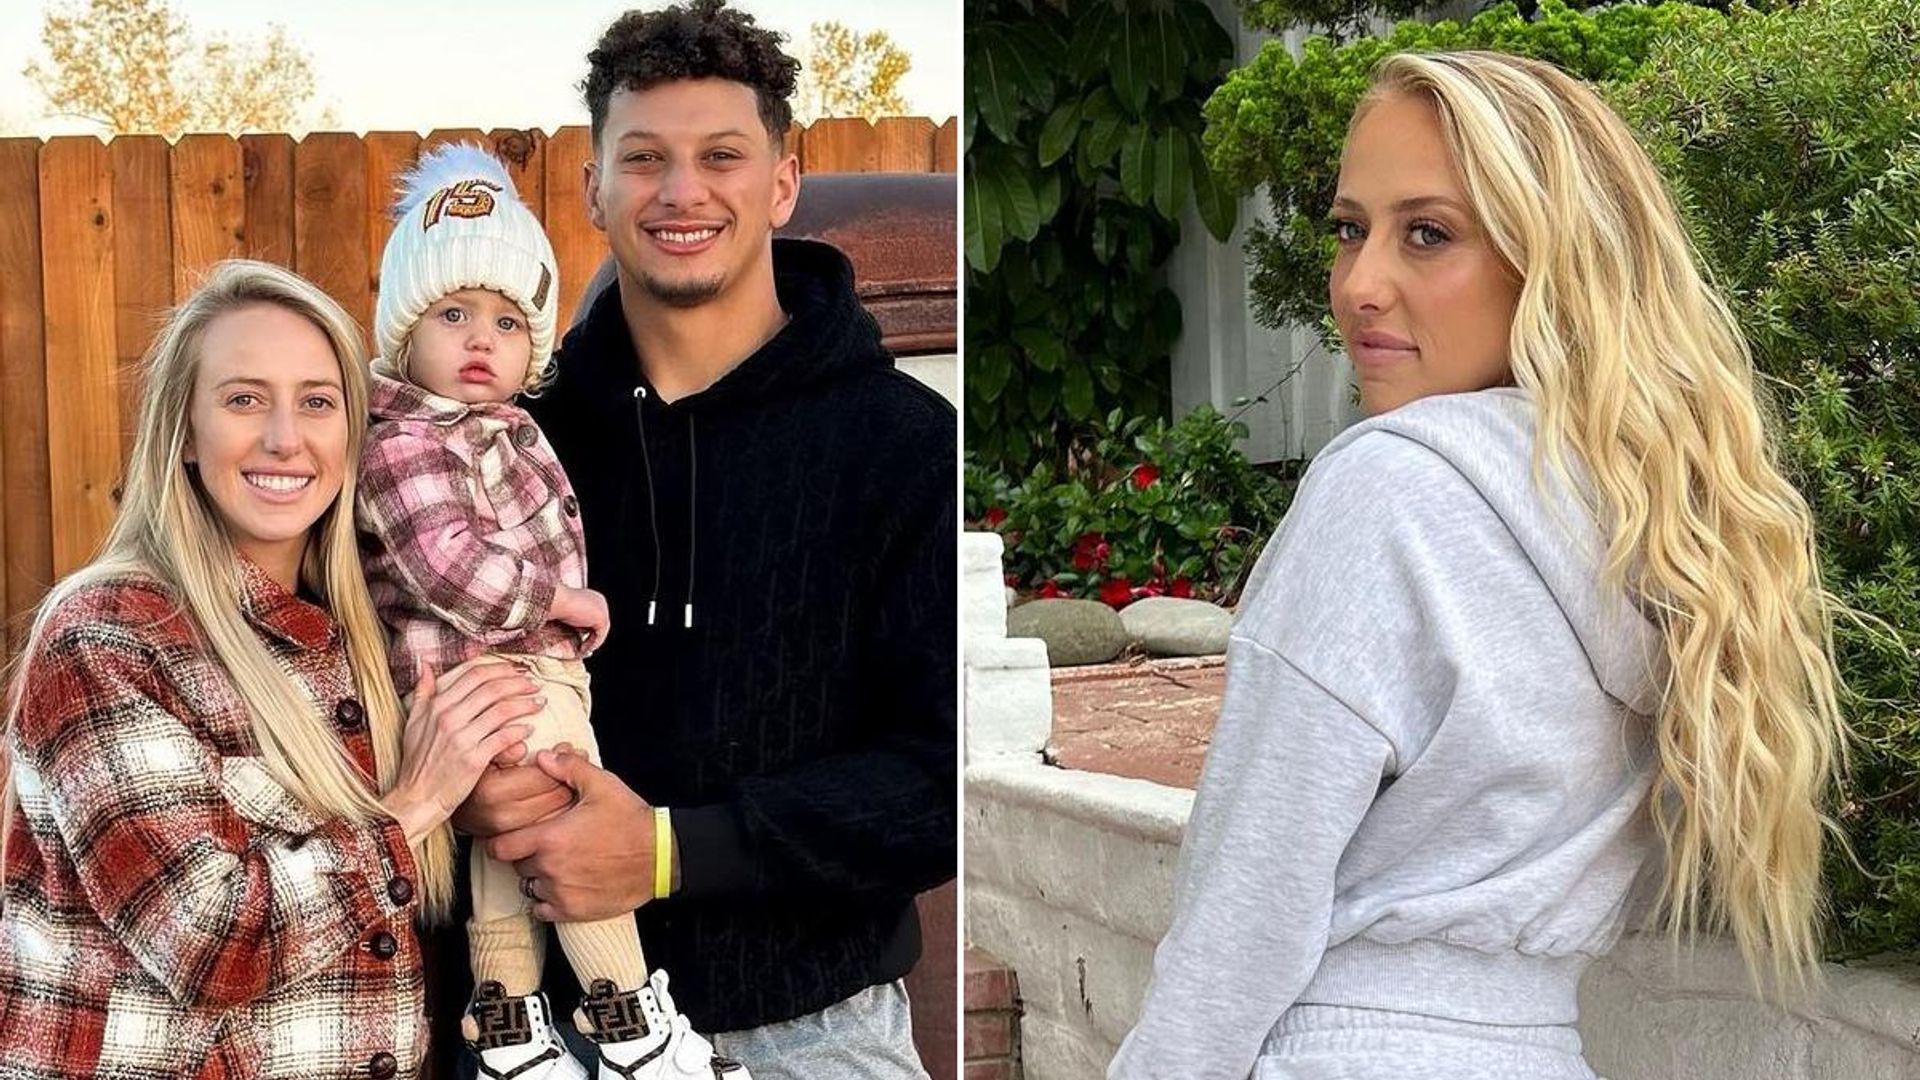 Nfl Star Patrick Mahomes Wife Brittany Poses In Nude Dress For Special